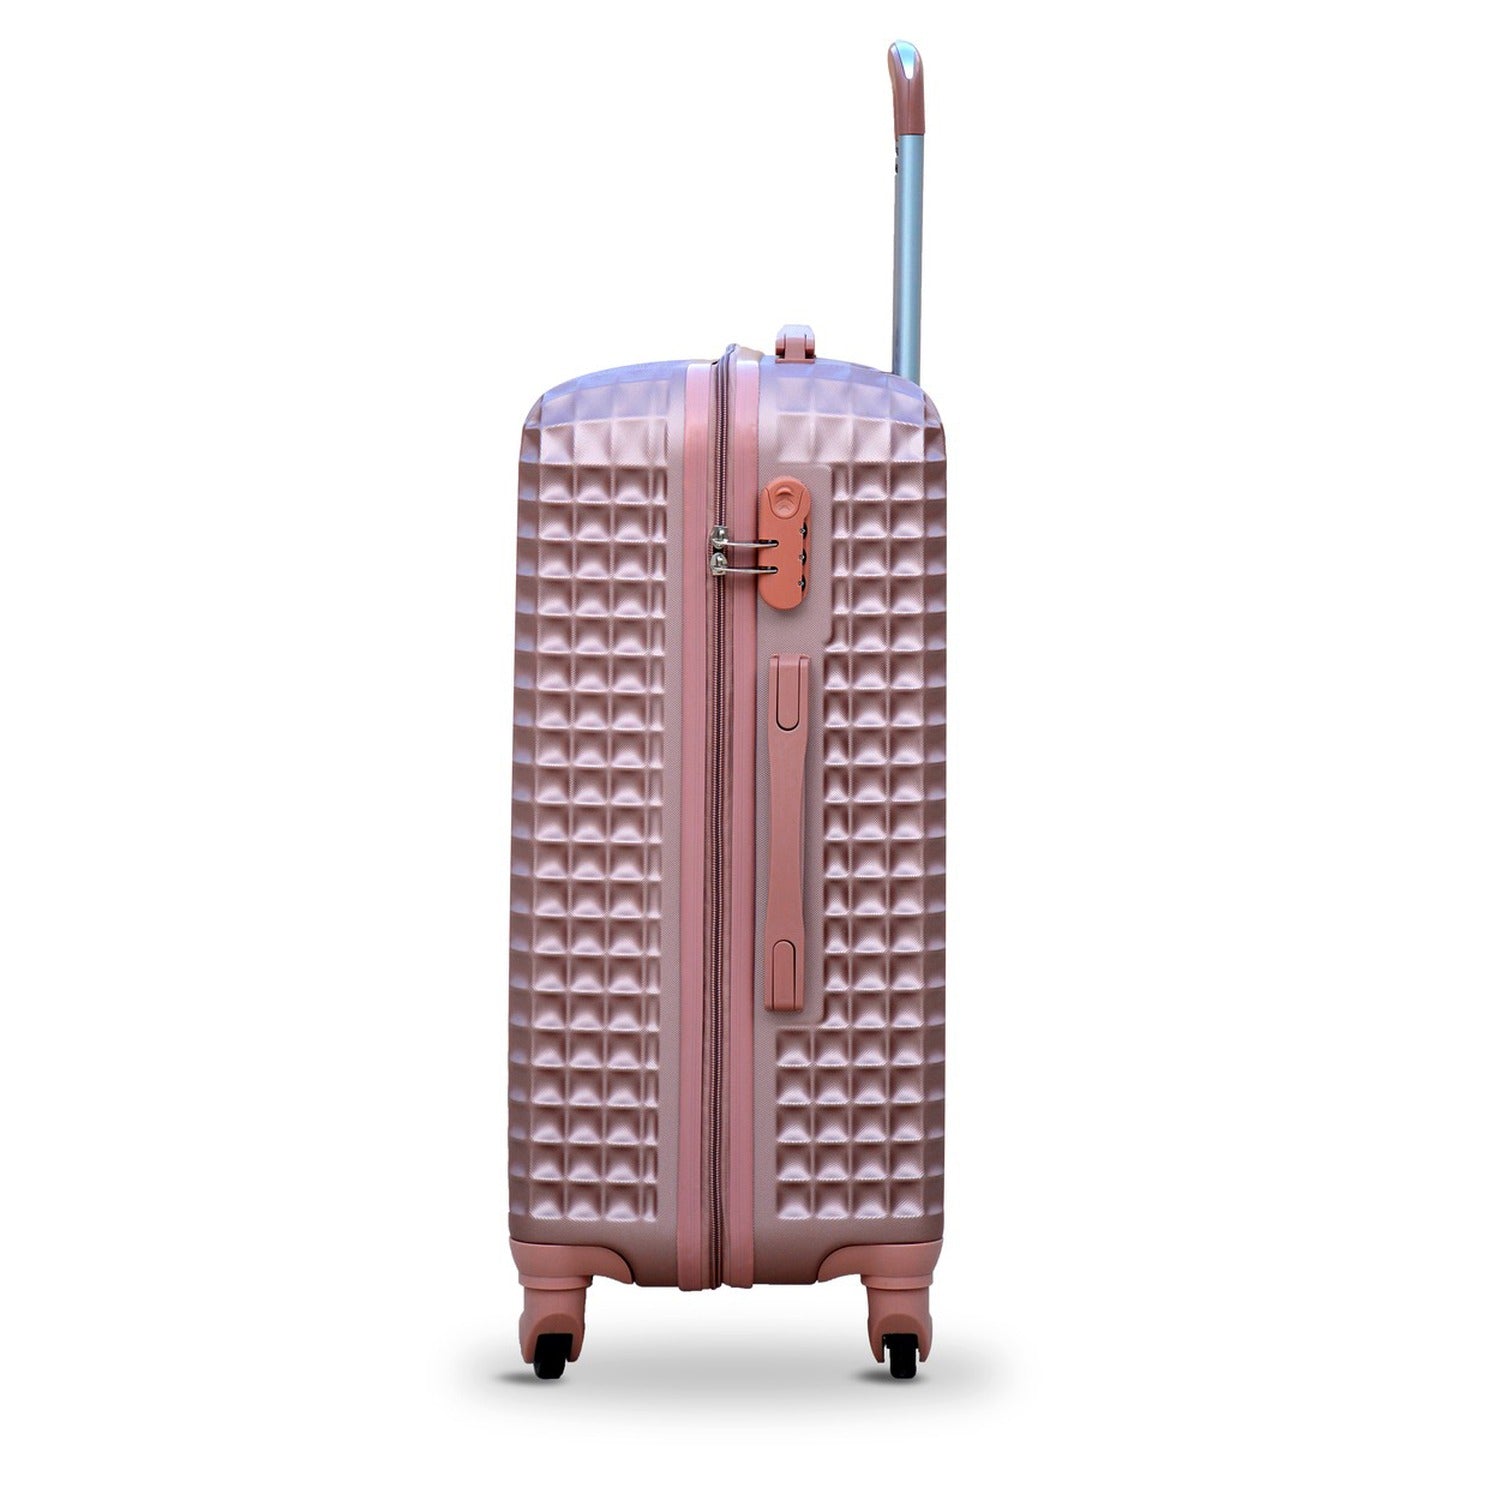 4 Piece Set 7" 20" 24" 28 Inches Rose Gold Colour Square Cut ABS Luggage Lightweight Hard Case Trolley Bag | 2 Year Warranty